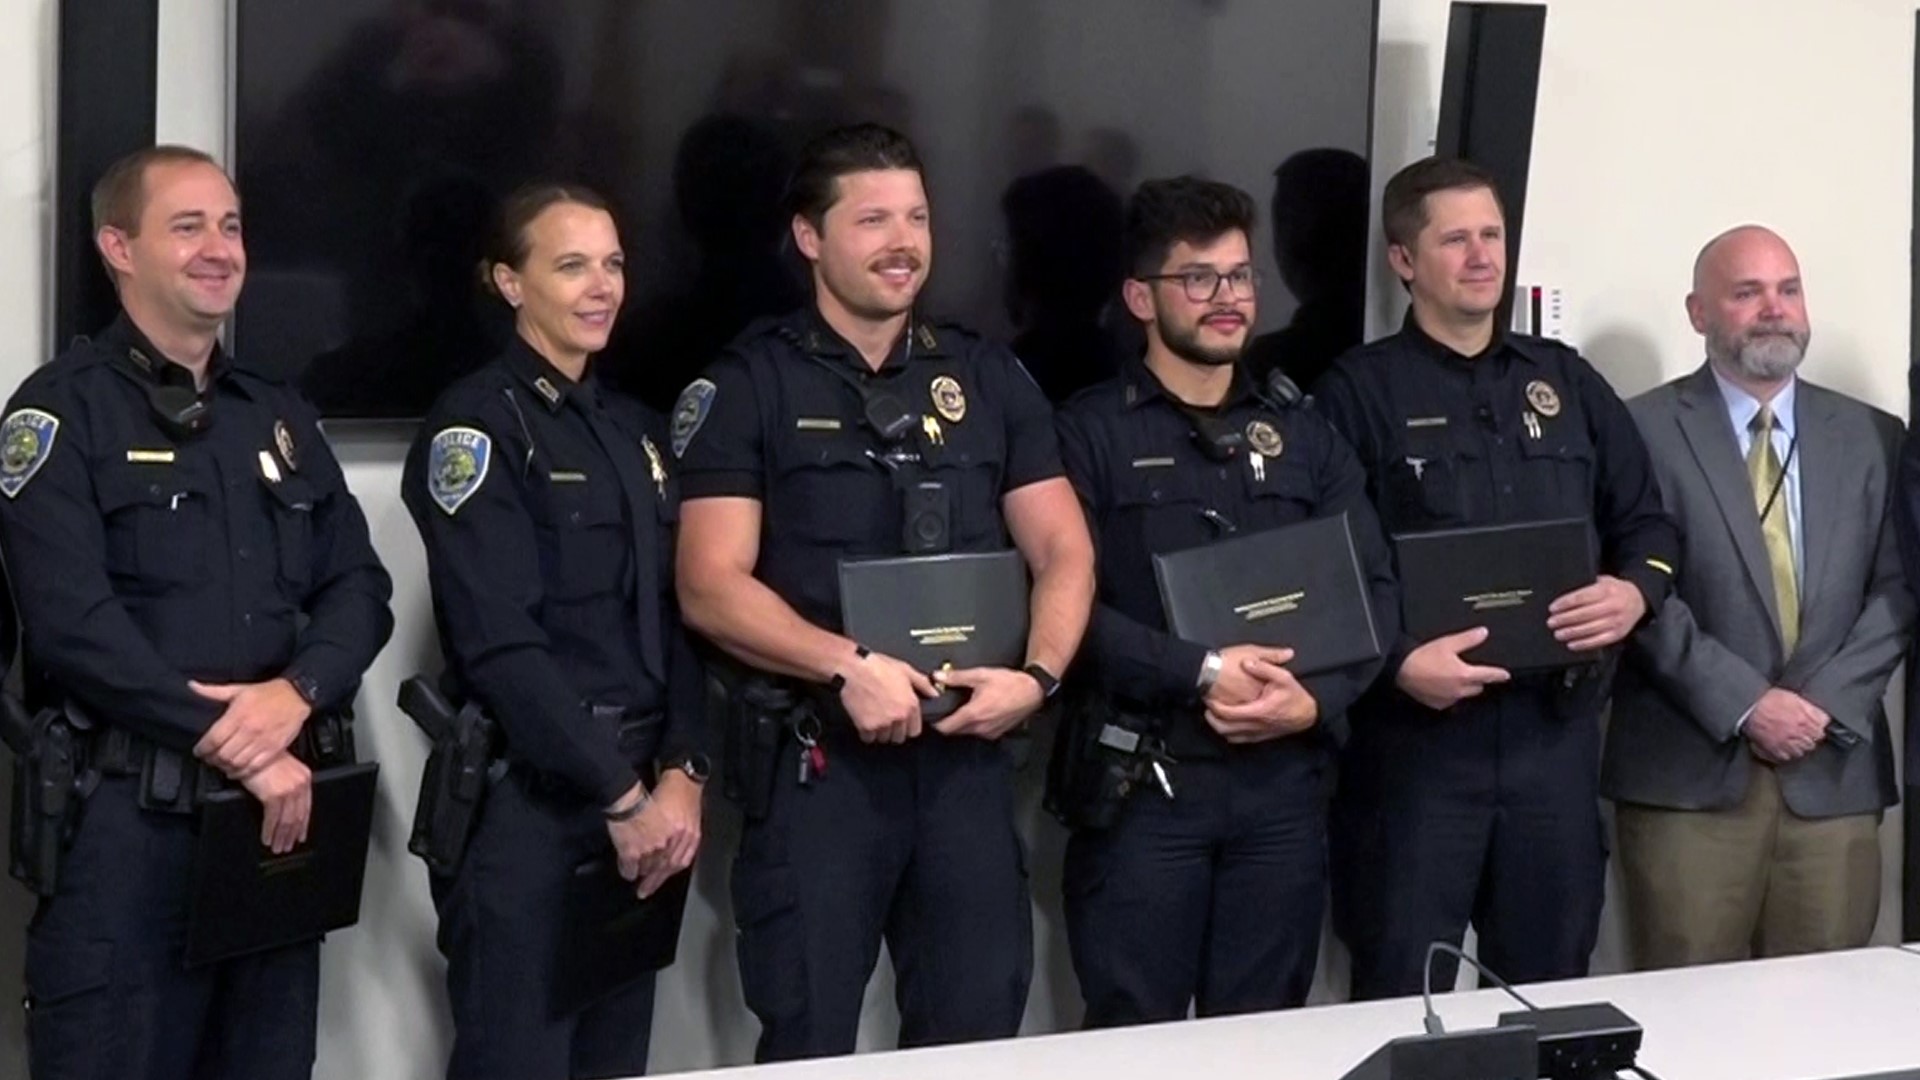 A major award tonight was given to several Fayetteville police officers.